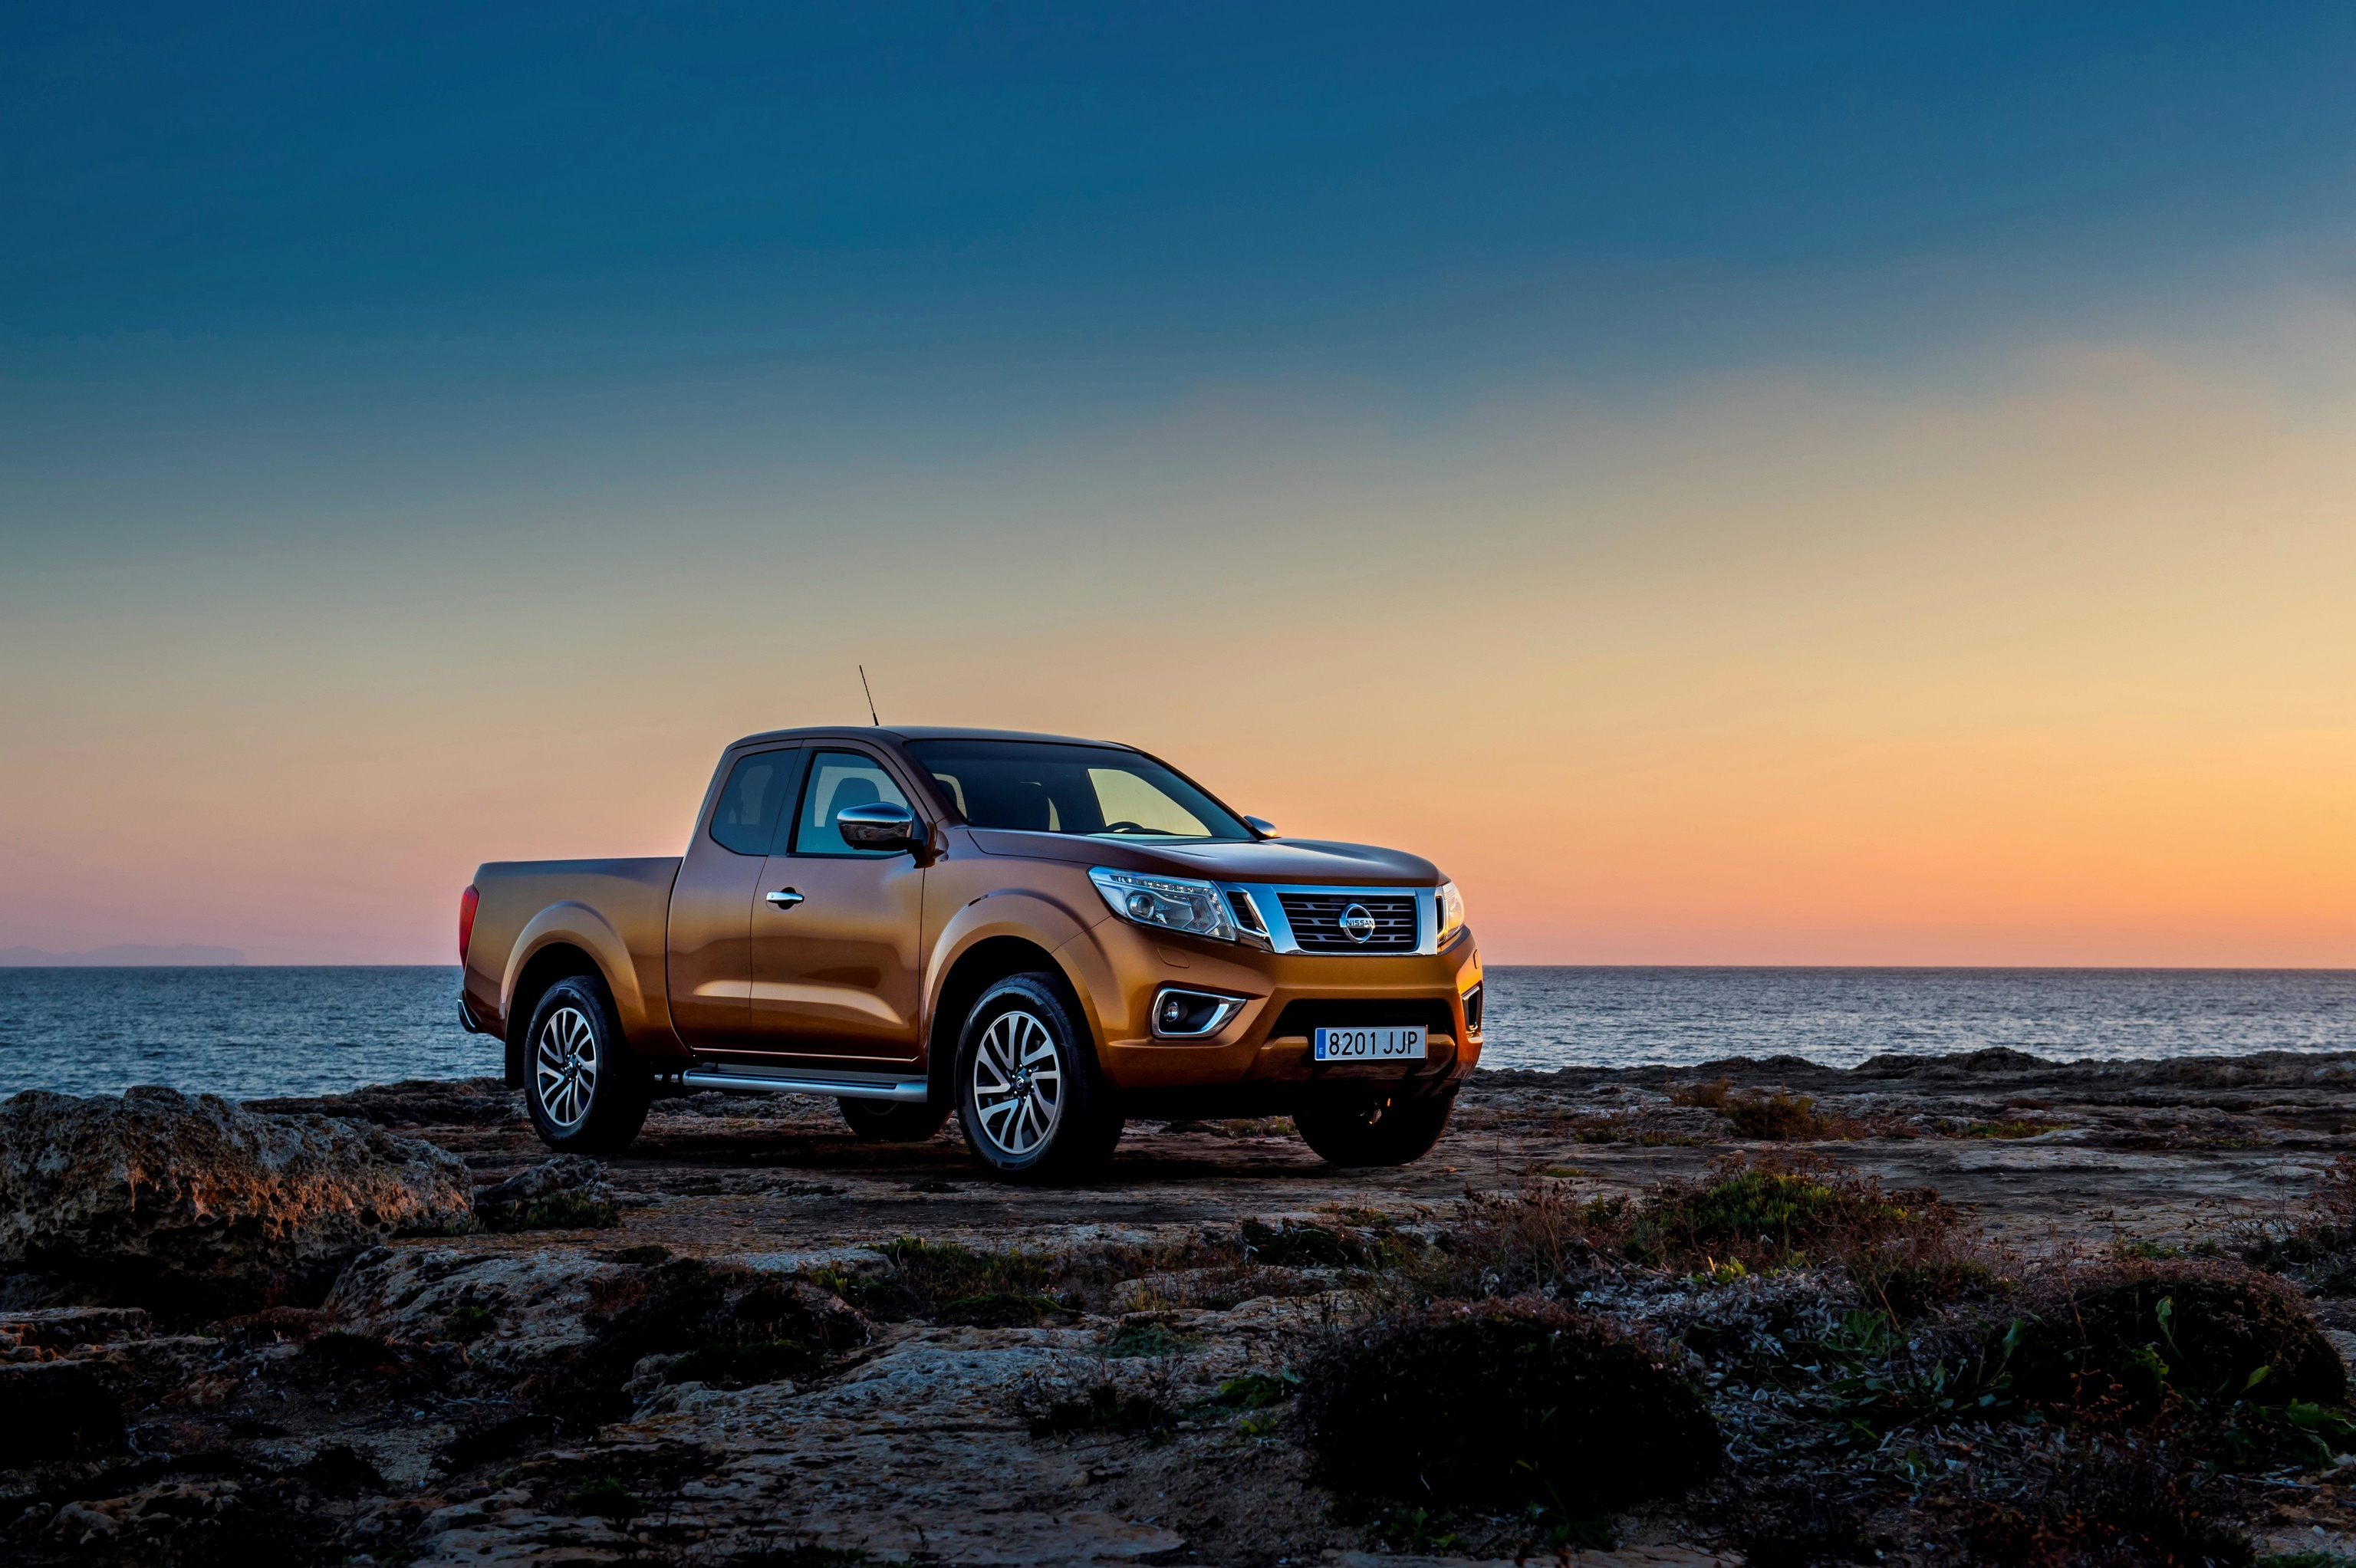 Nissan Navara stands on the beach during sunset